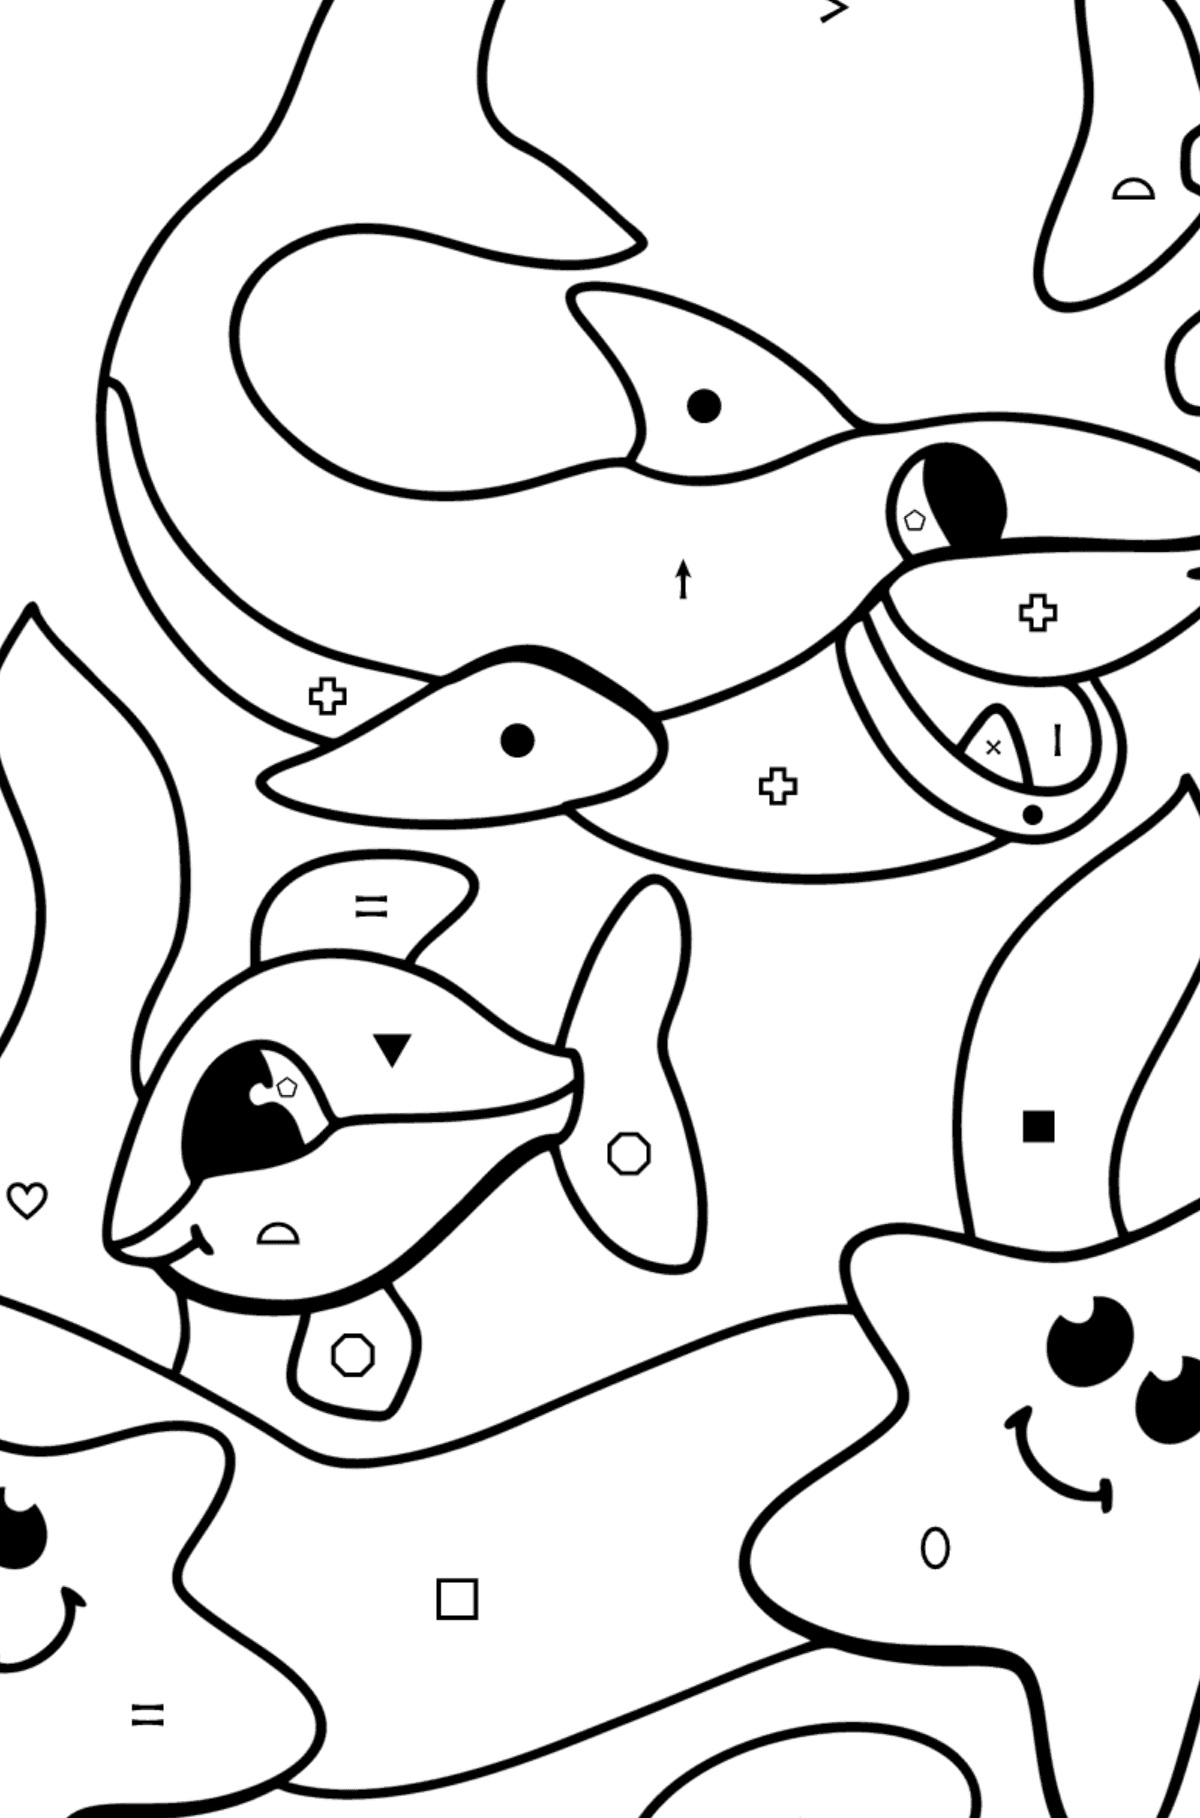 Cute shark coloring page - Coloring by Symbols and Geometric Shapes for Kids